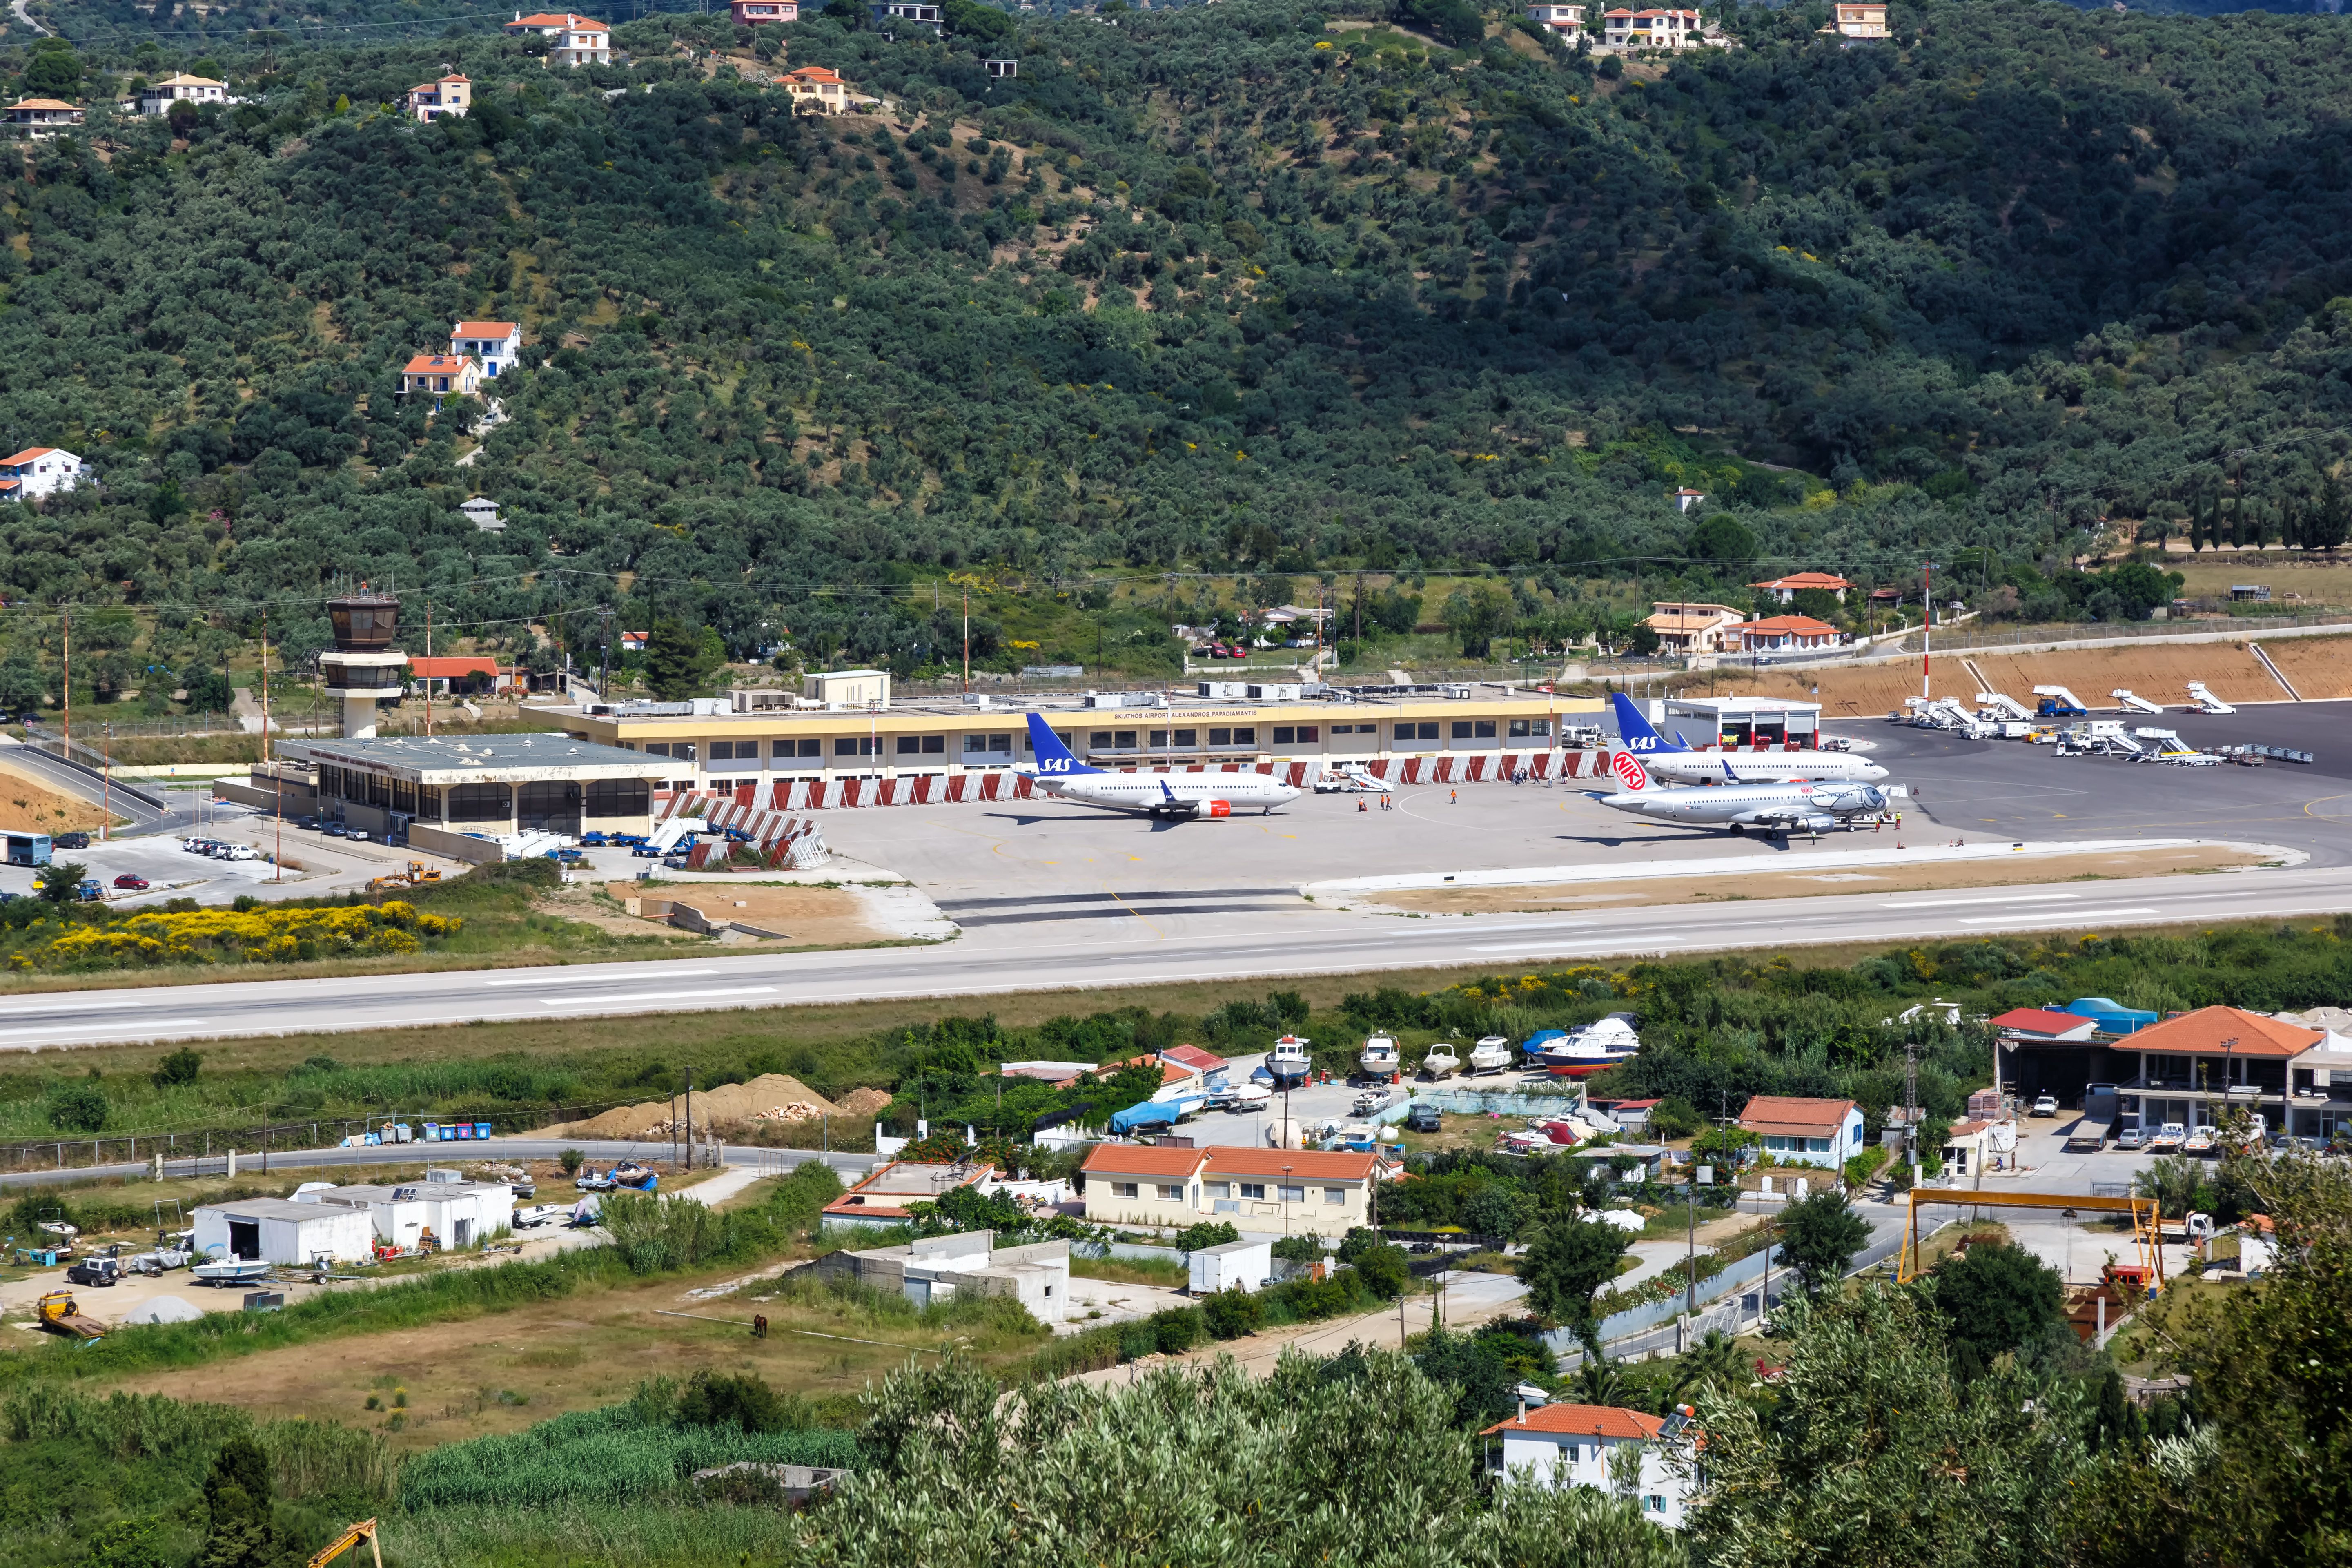 Airliners Parked At Skiathos Airport.